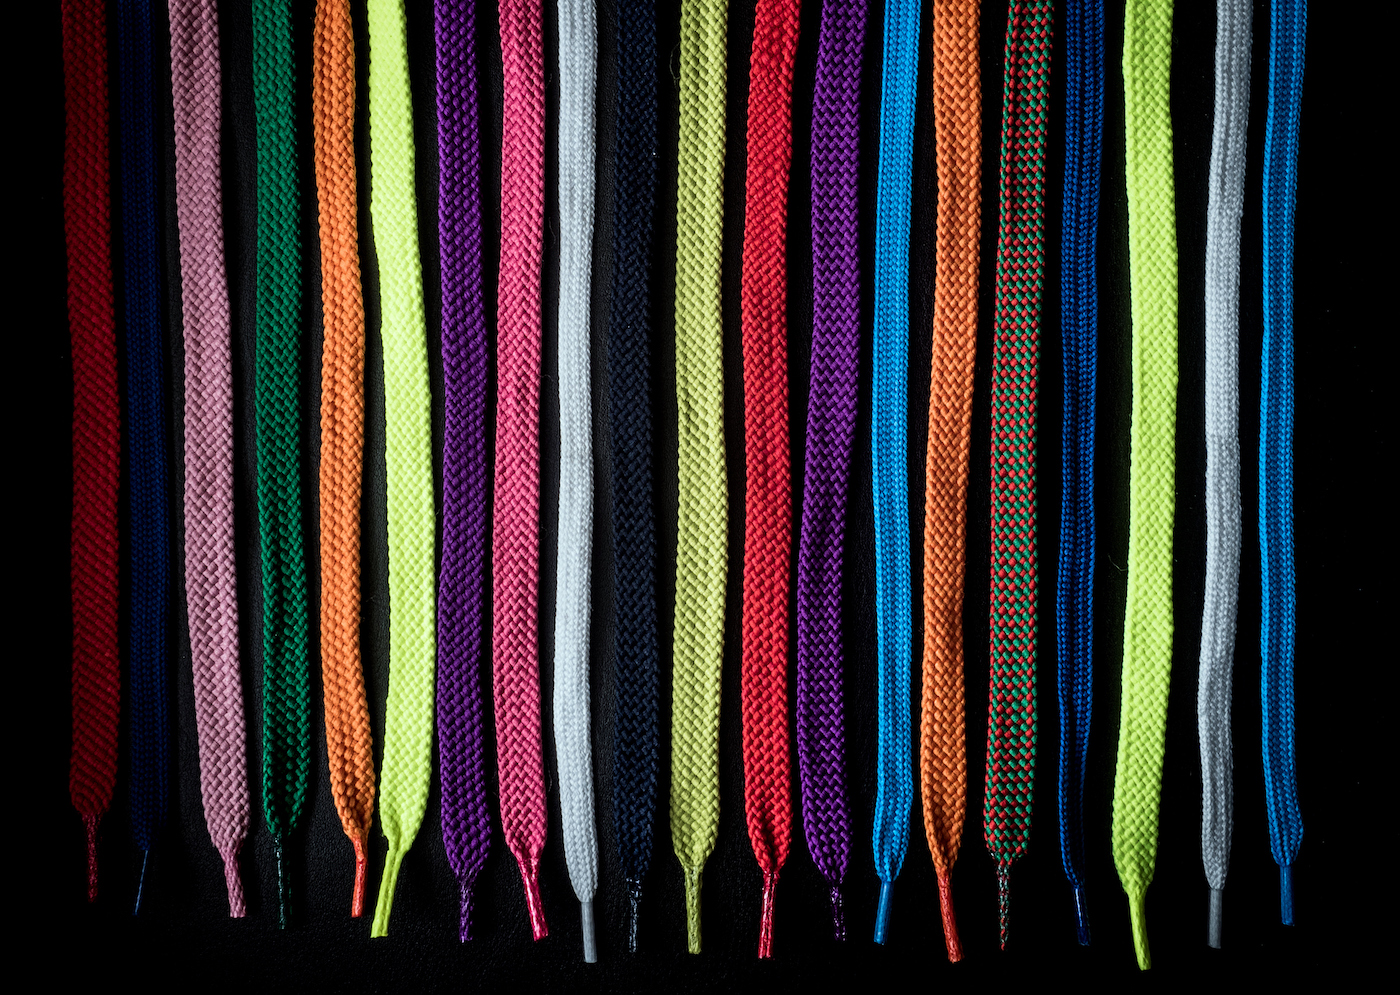 Close-up of multi-colored shoelaces on a black background